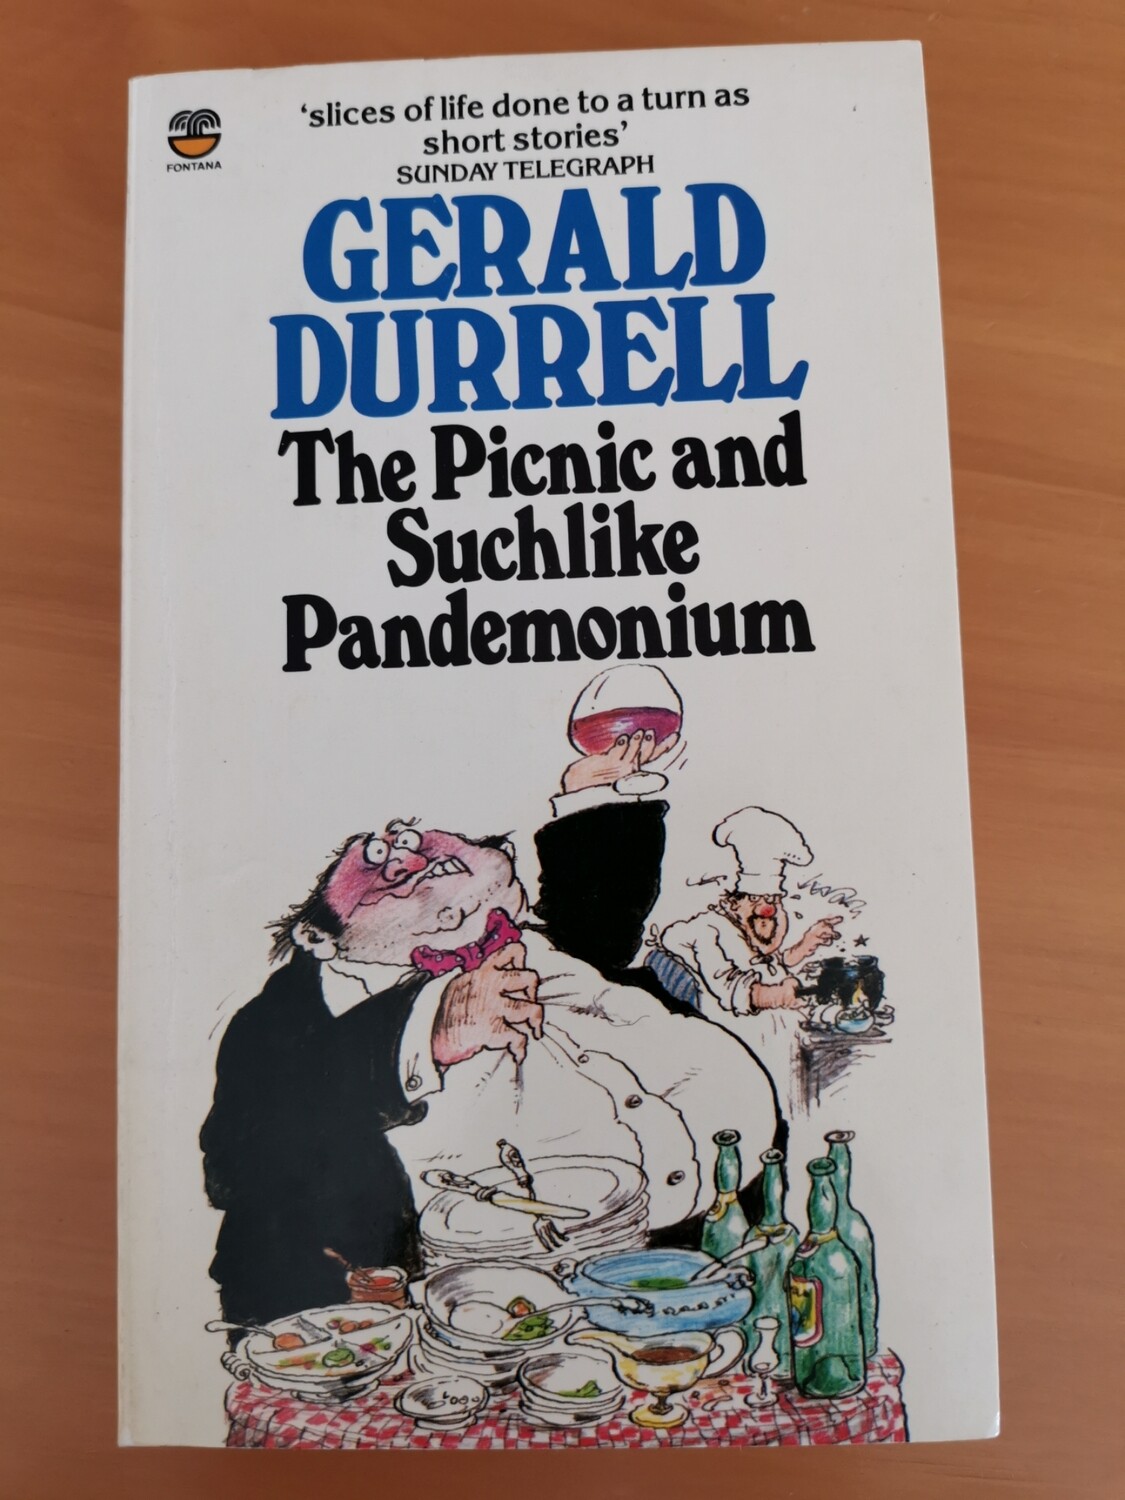 The Picnic and suchlike pandemonium, Gerald Durrell